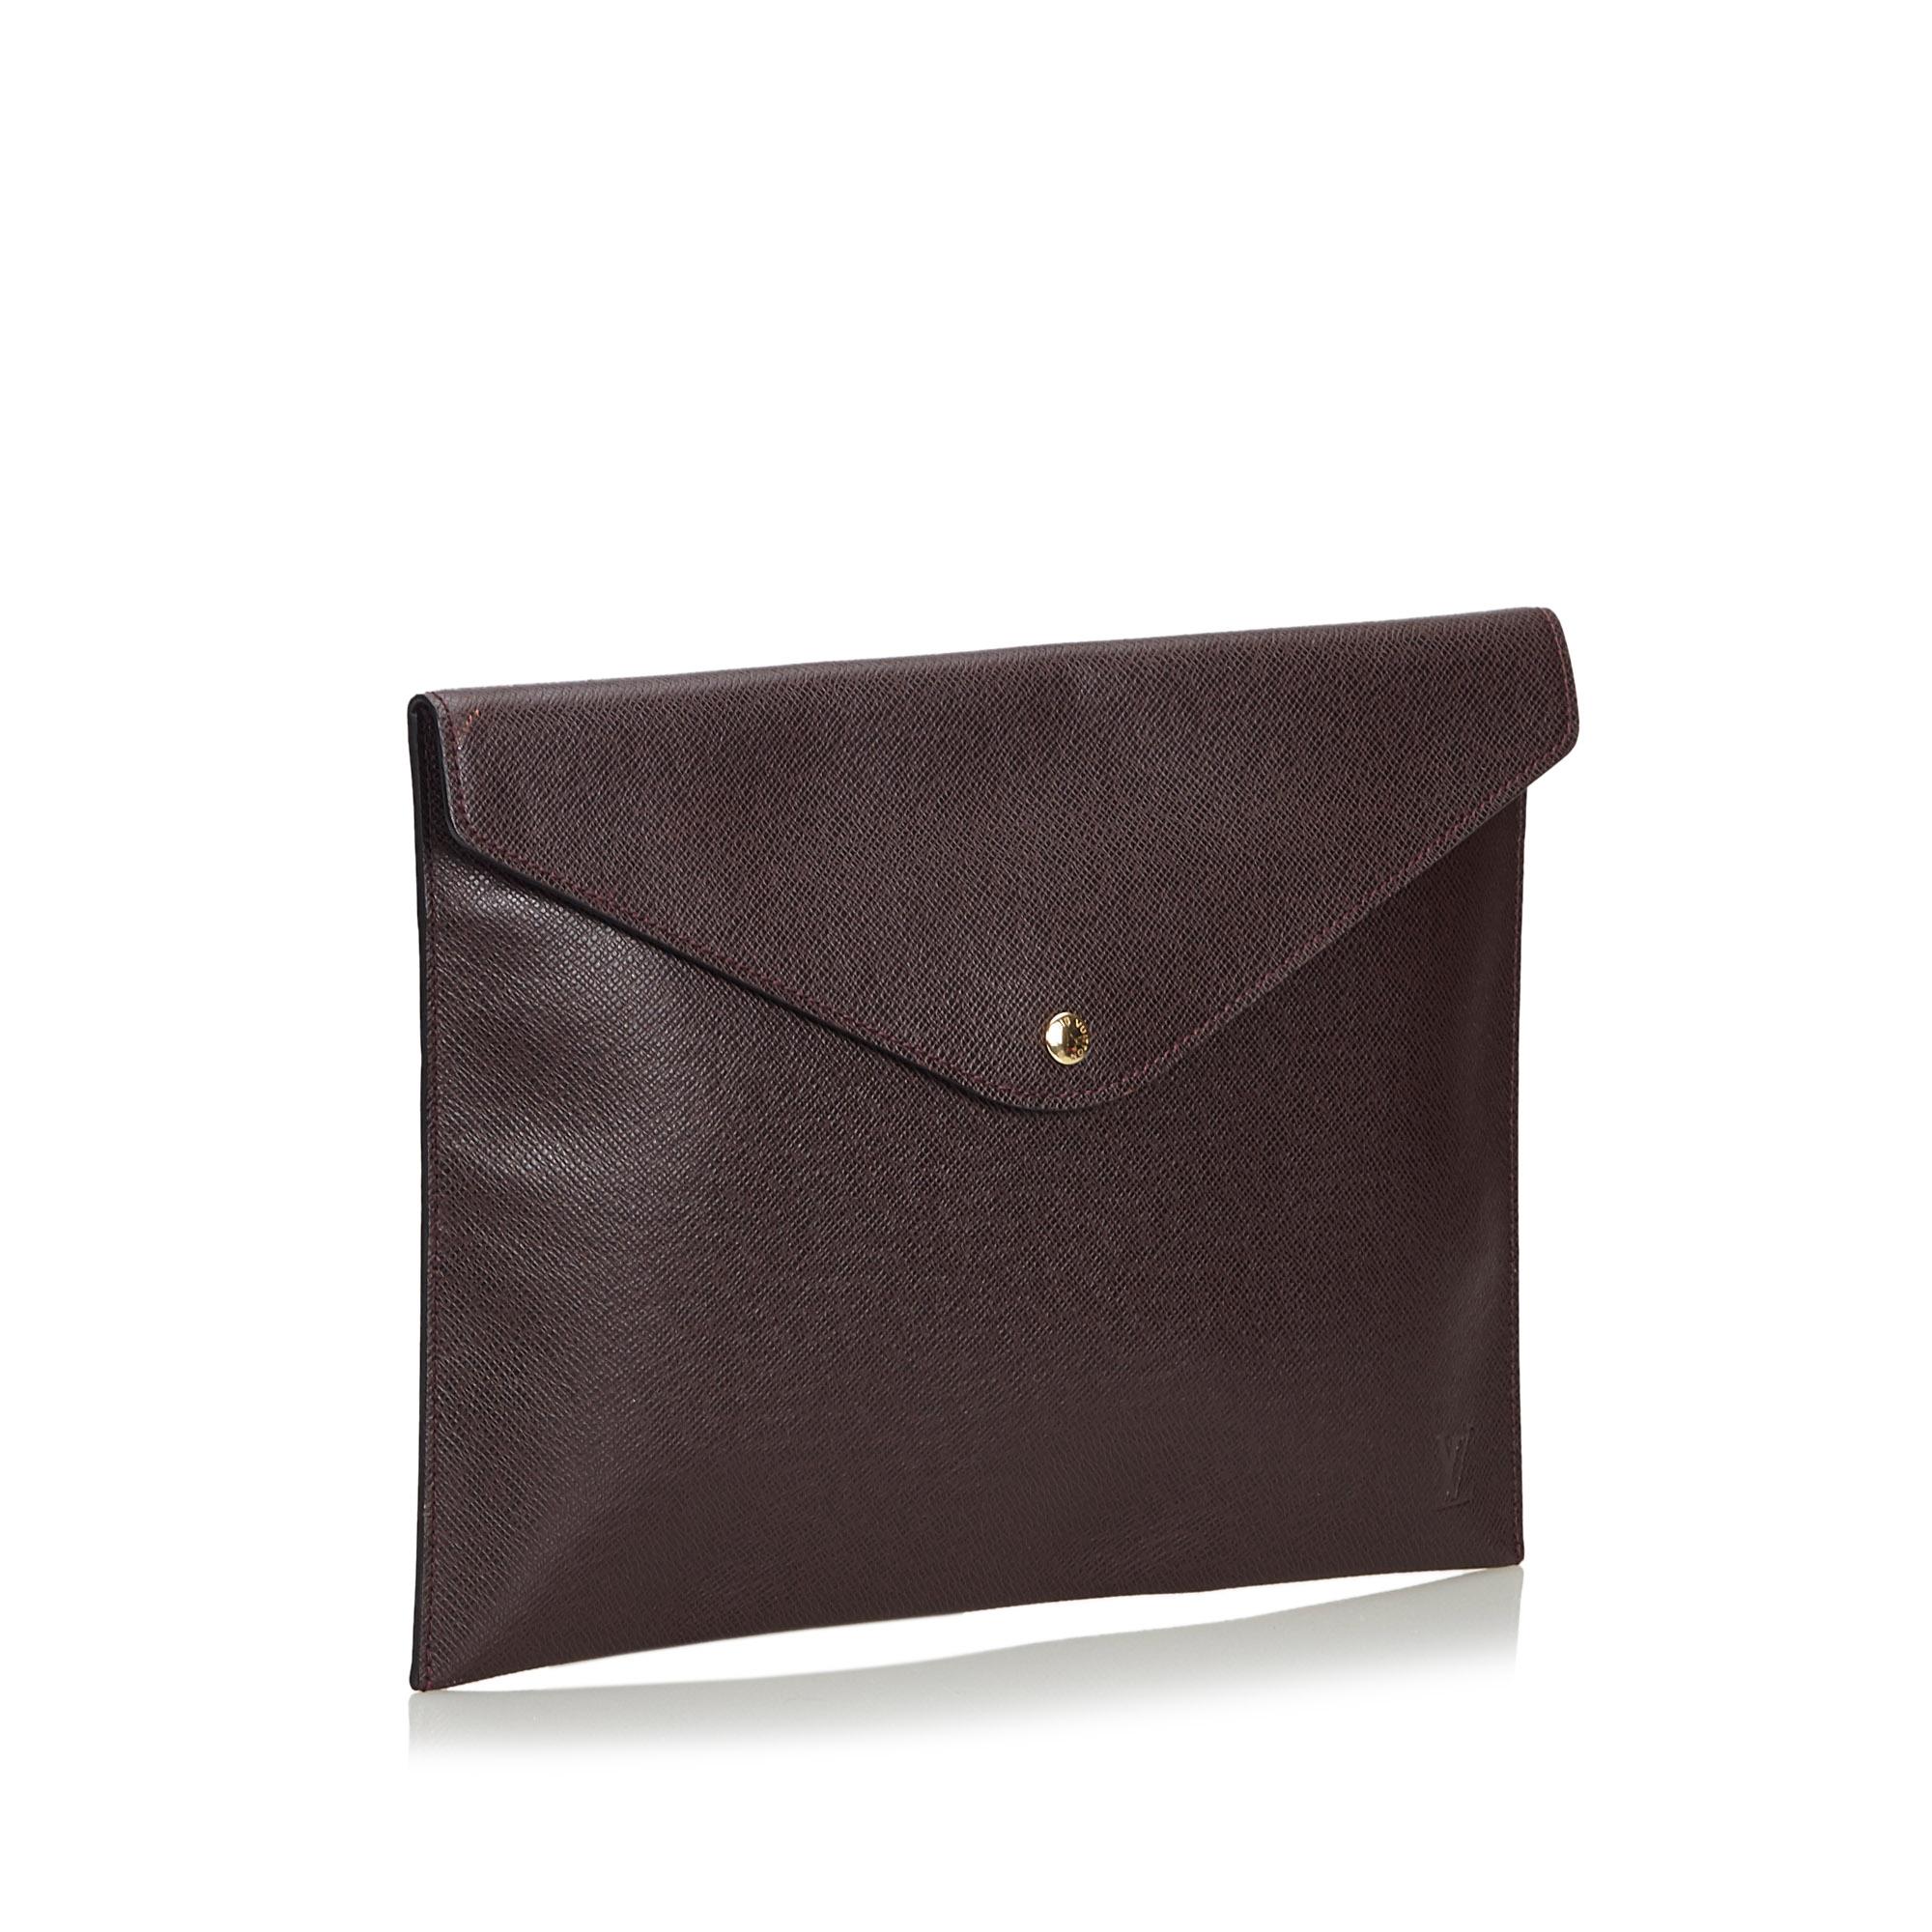 This Document Case Clutch Bag features a taiga leather body and front flap with button clasp closure. It carries as B+ condition rating.

Inclusions: 
This item does not come with inclusions.


Louis Vuitton pieces do not come with an authenticity